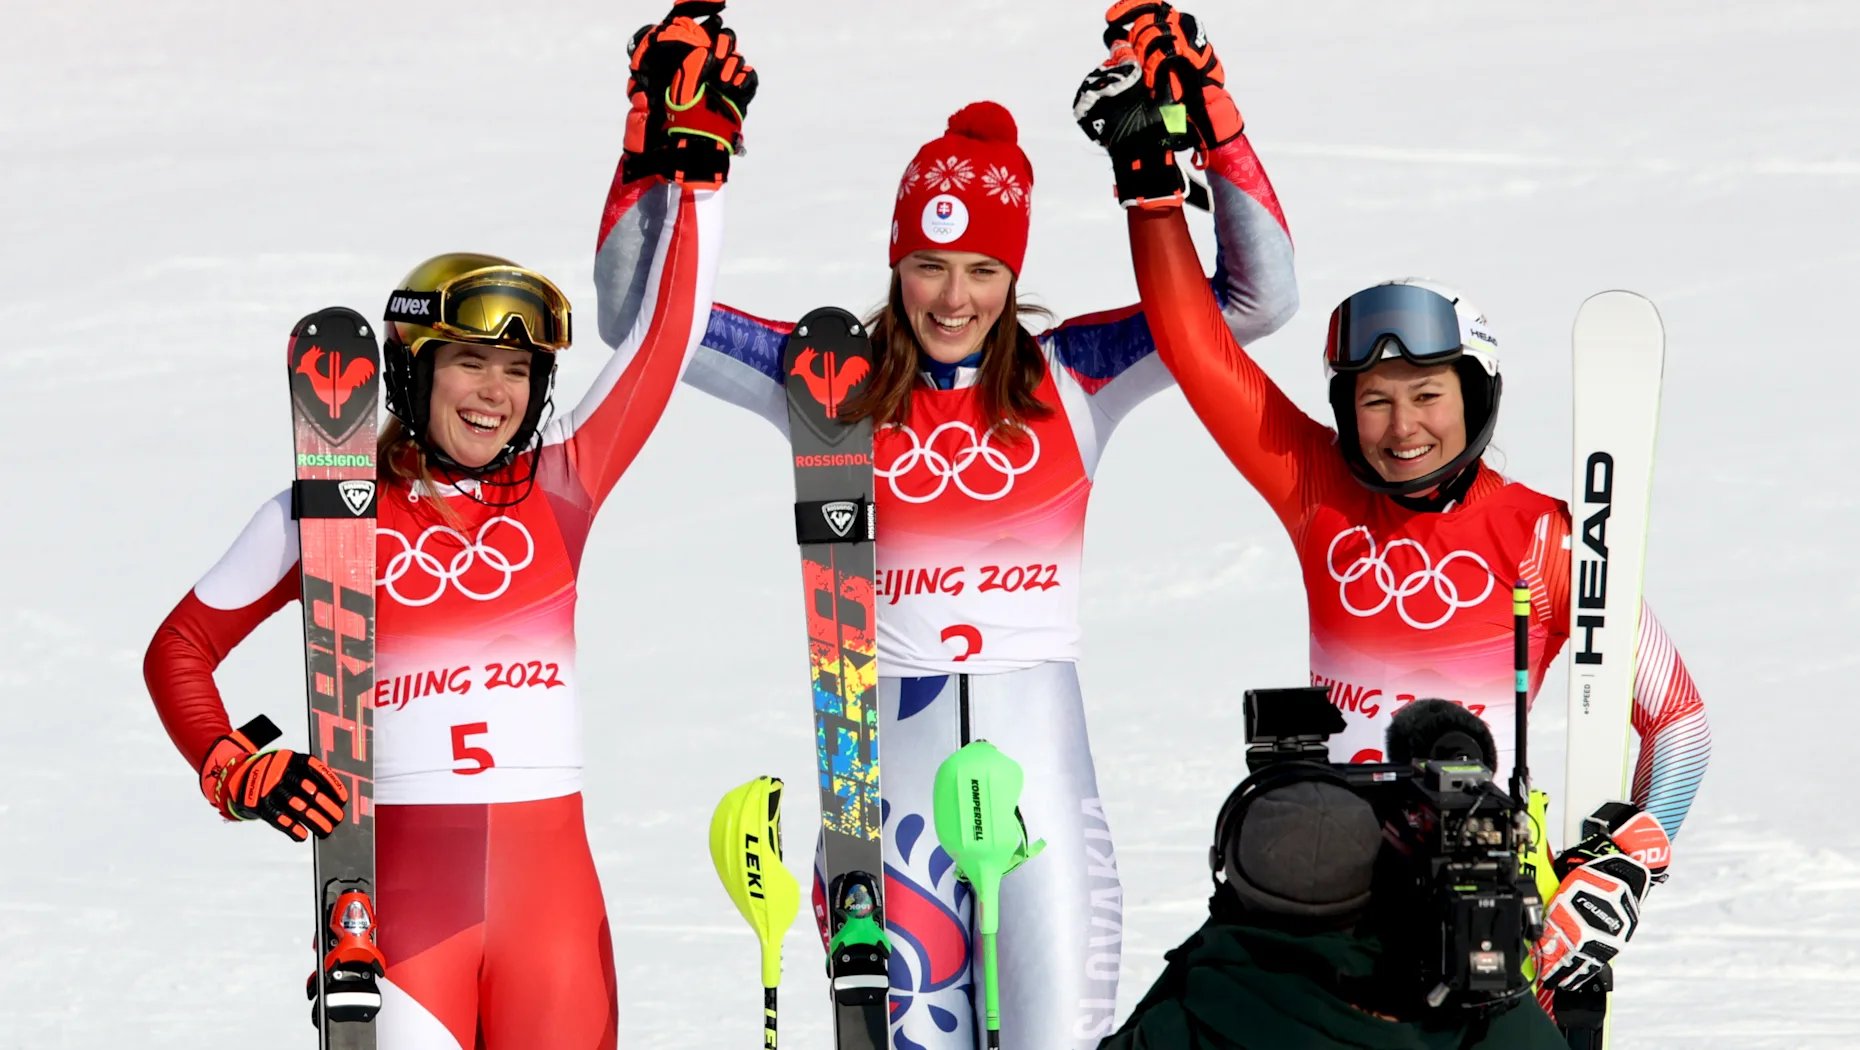 Petra Vlhova wins first-ever Olympic medal in Alpine skiing for Slovakia – and it’s gold